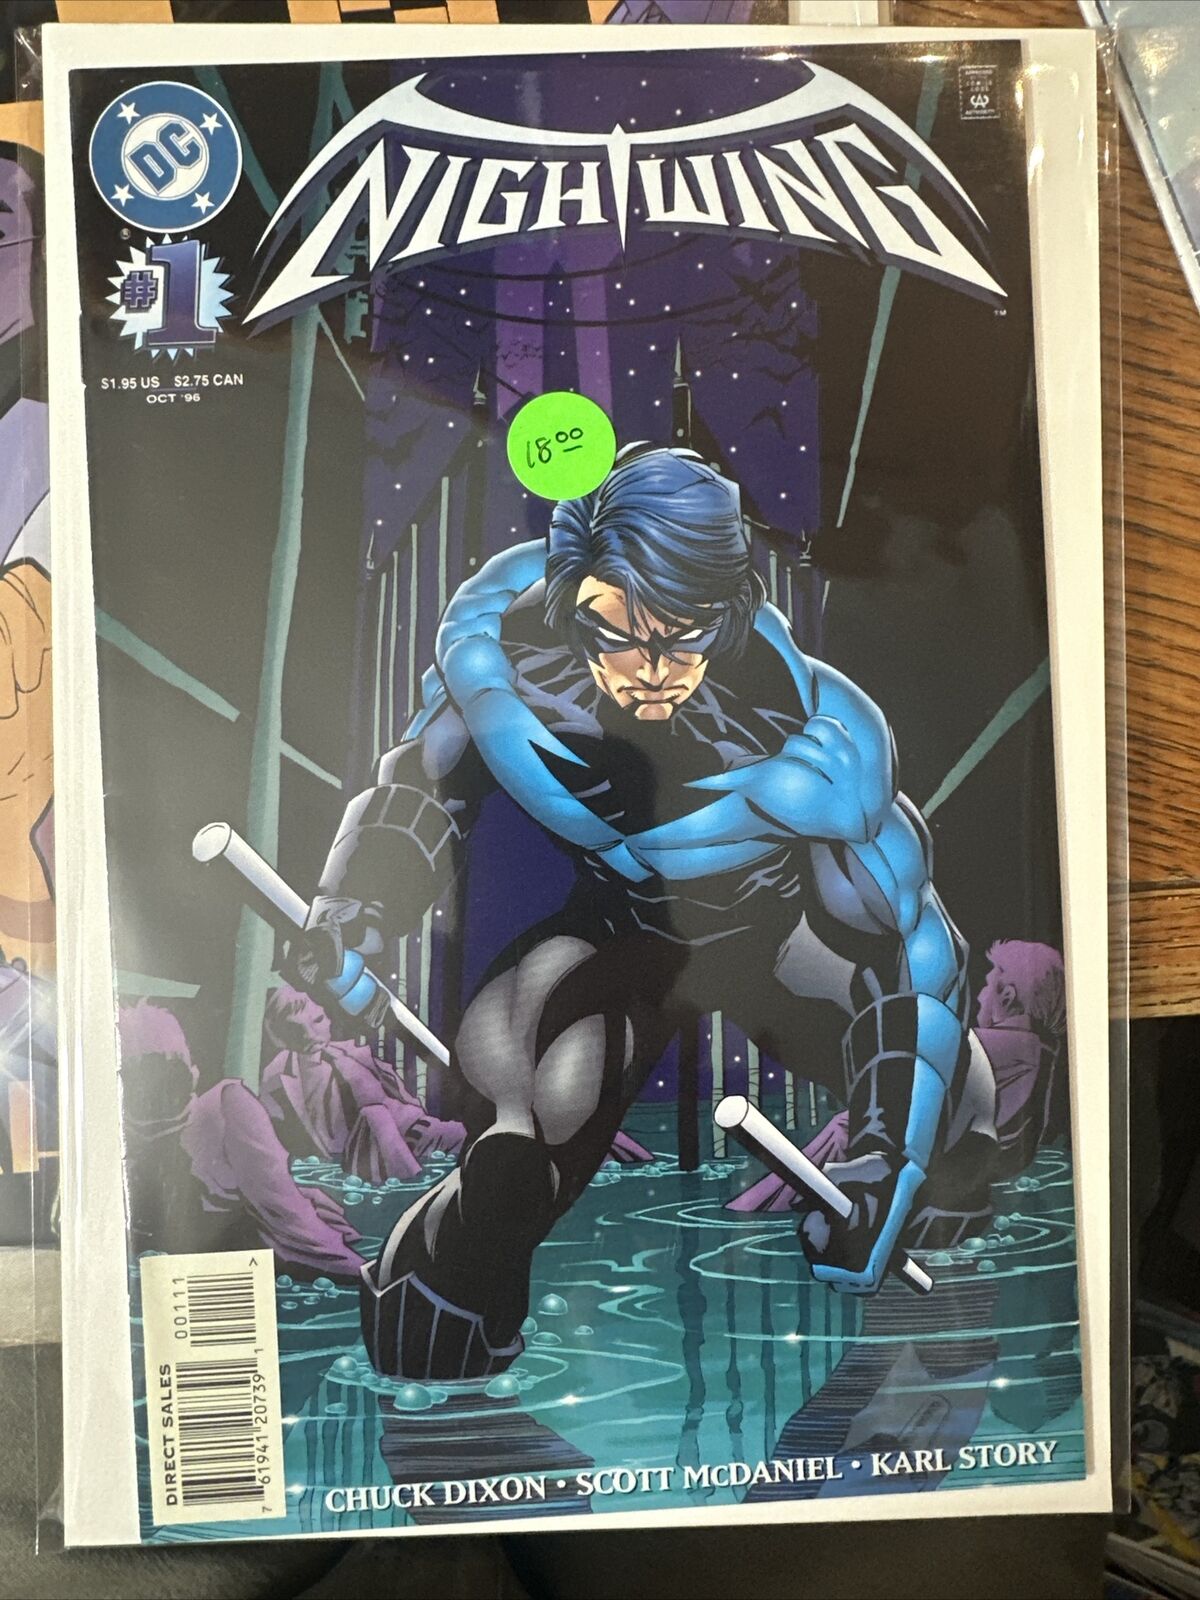 Nightwing #1 (DC Comics, October 1996) Perfect Book Should Get Graded